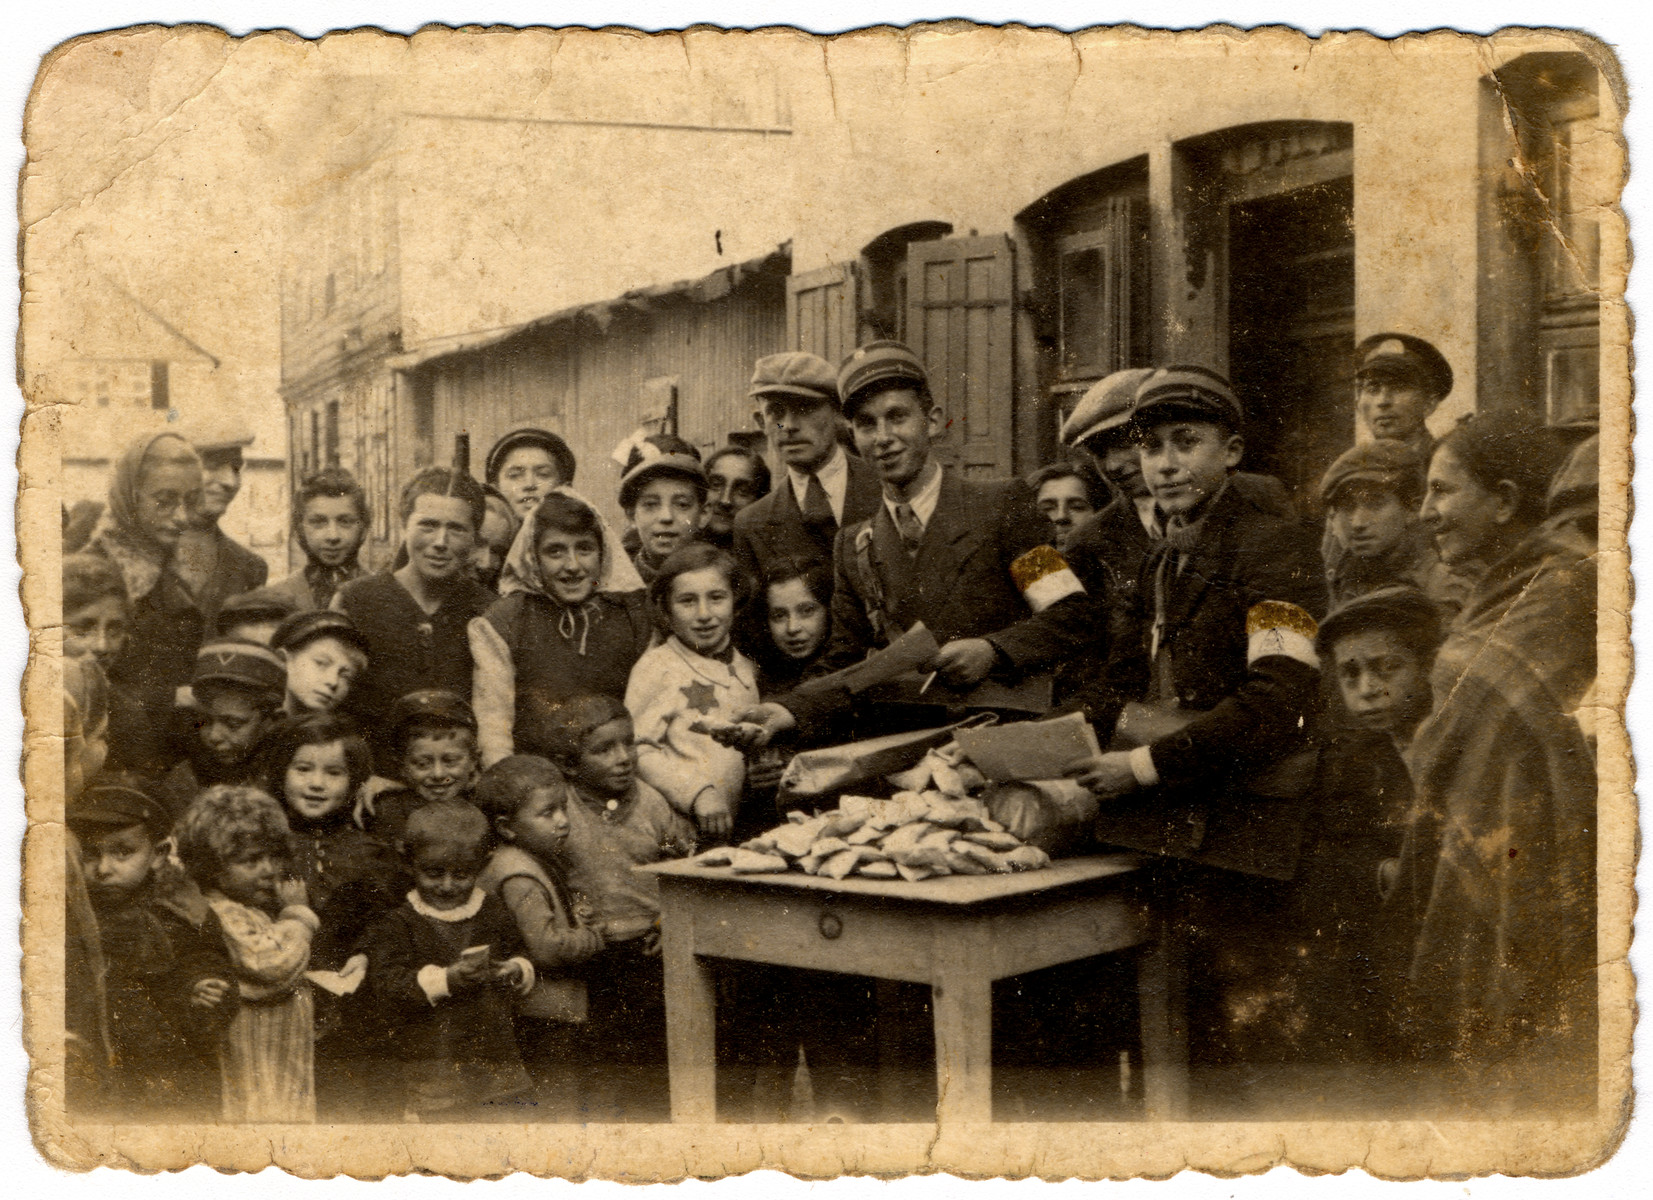 J. Lewkowicz and A. Jakobowicz distribute candy for the holidays to the children in the Lodz ghetto.  [See #89759 for black/white version]

The original caption reads "Memento for distribution of candy to children."